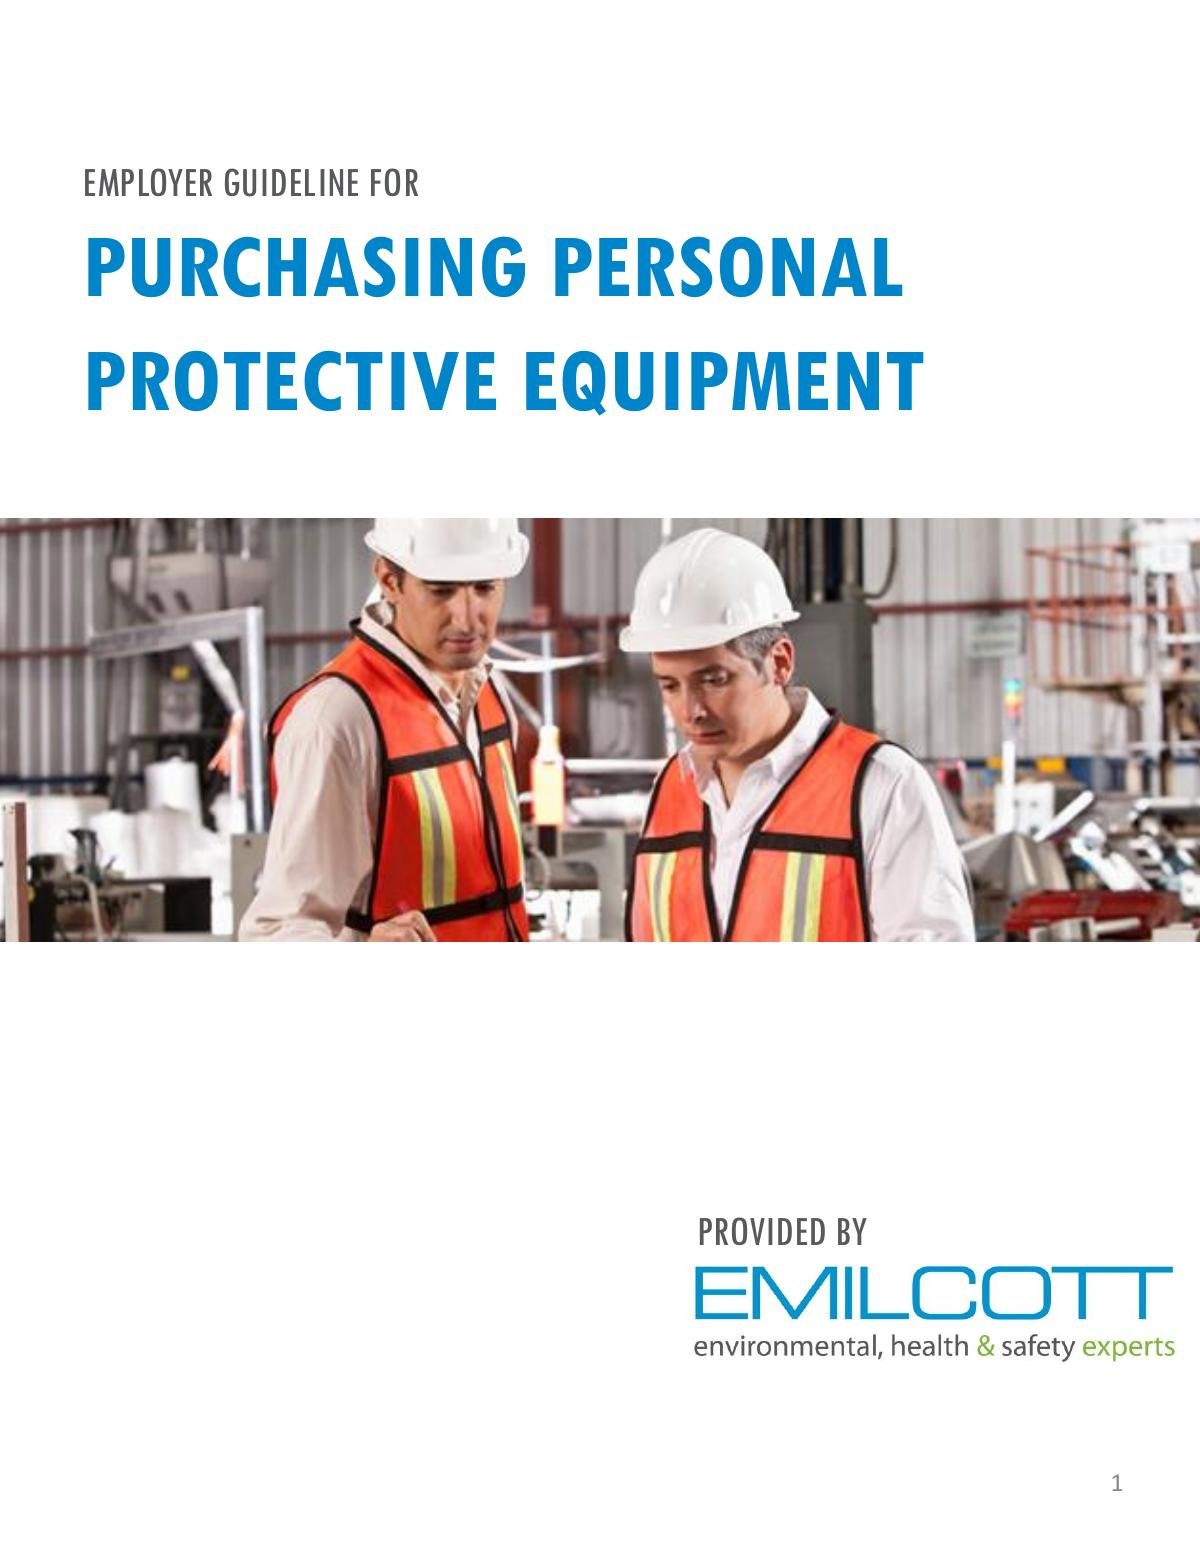 Employer Guideline for Purchasing Personal Protective Equipment